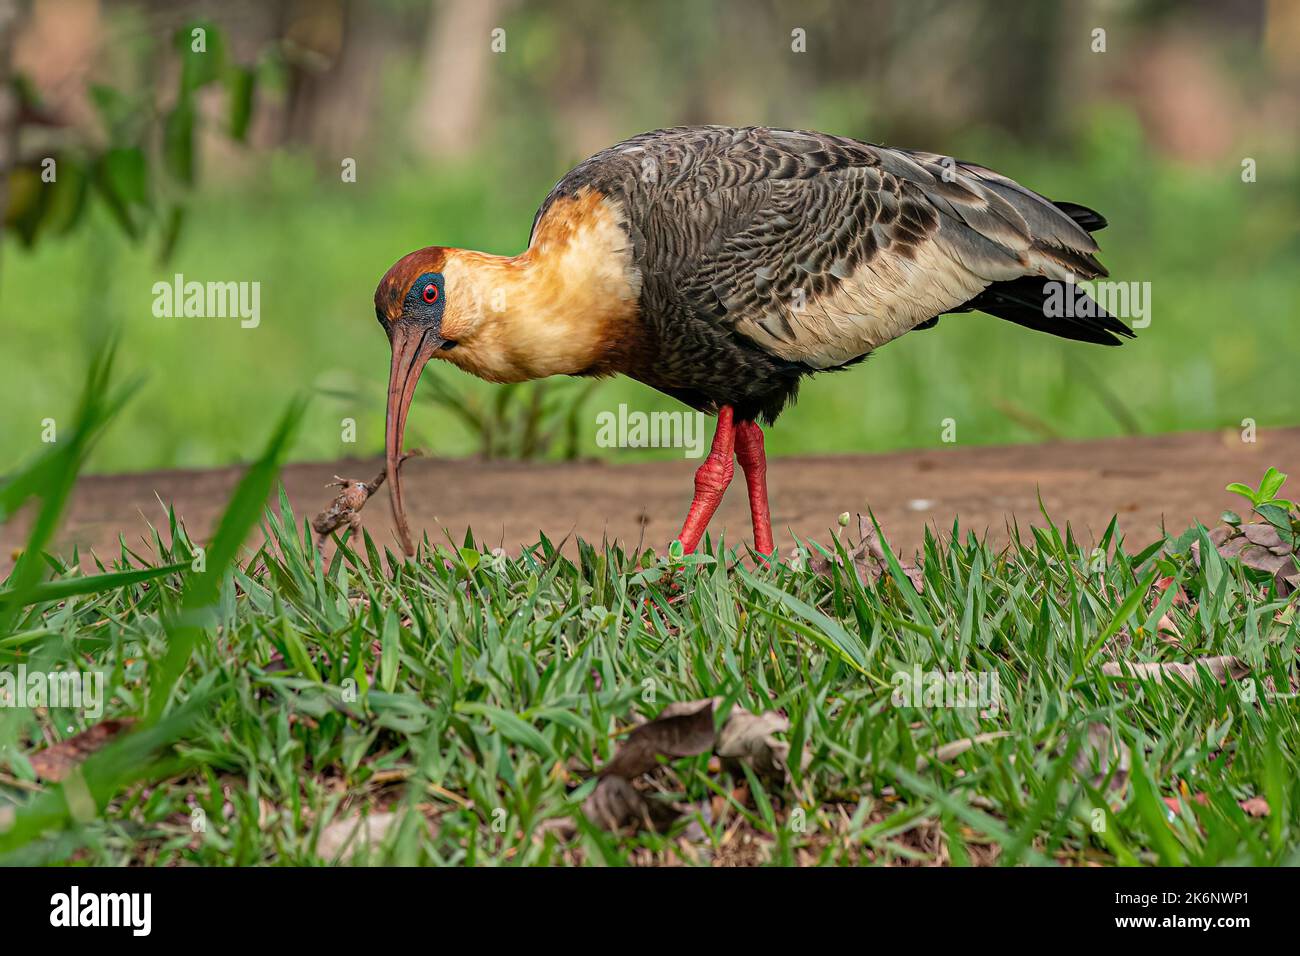 Buff necked Ibis of the species Theristicus caudatus preying on a frog Stock Photo